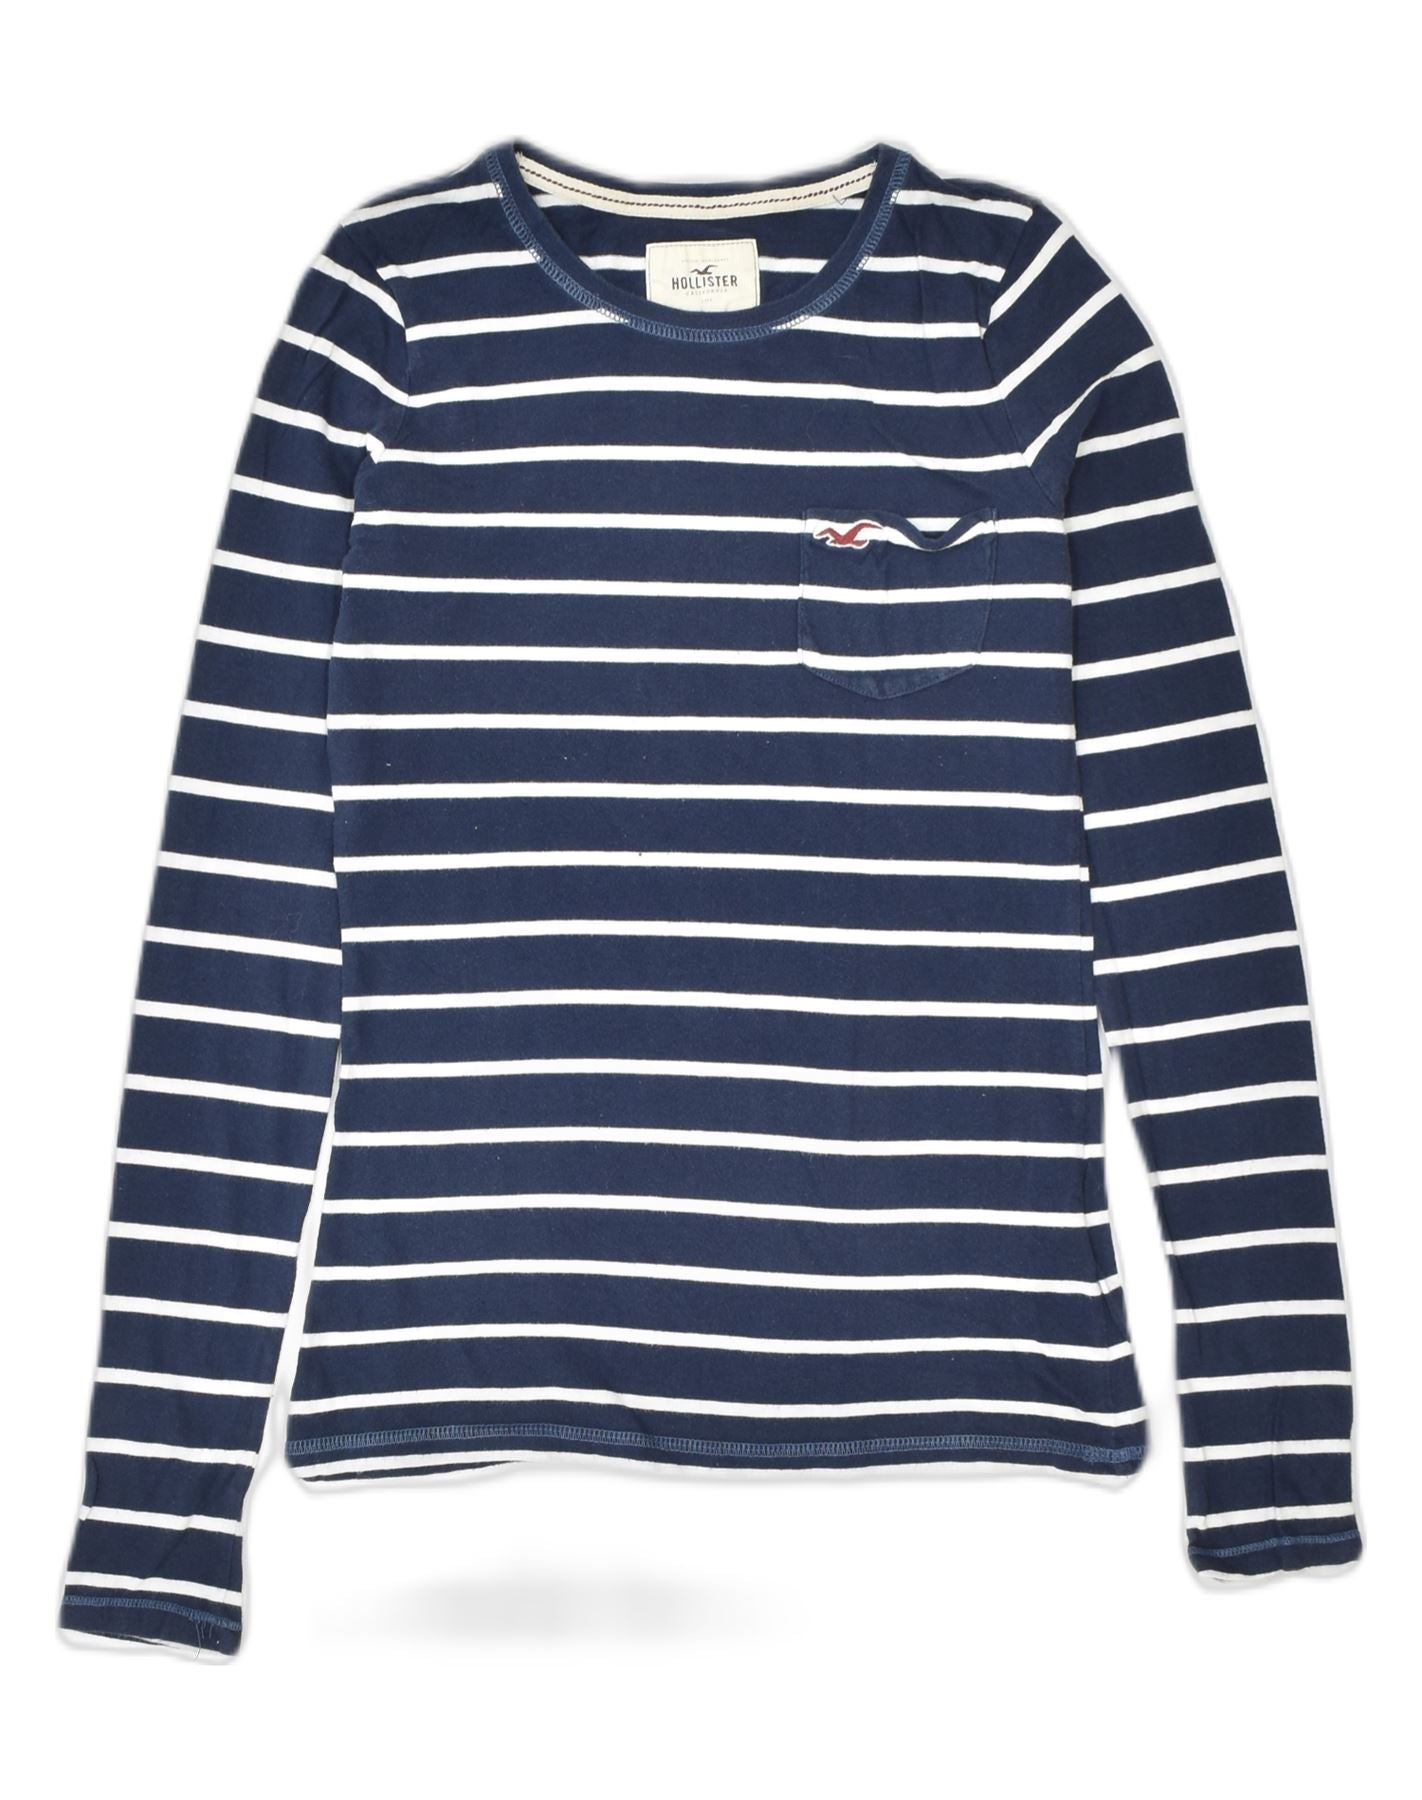 HOLLISTER Womens Top Long Sleeve UK 10 Small Navy Blue Striped Cotton, Vintage & Second-Hand Clothing Online